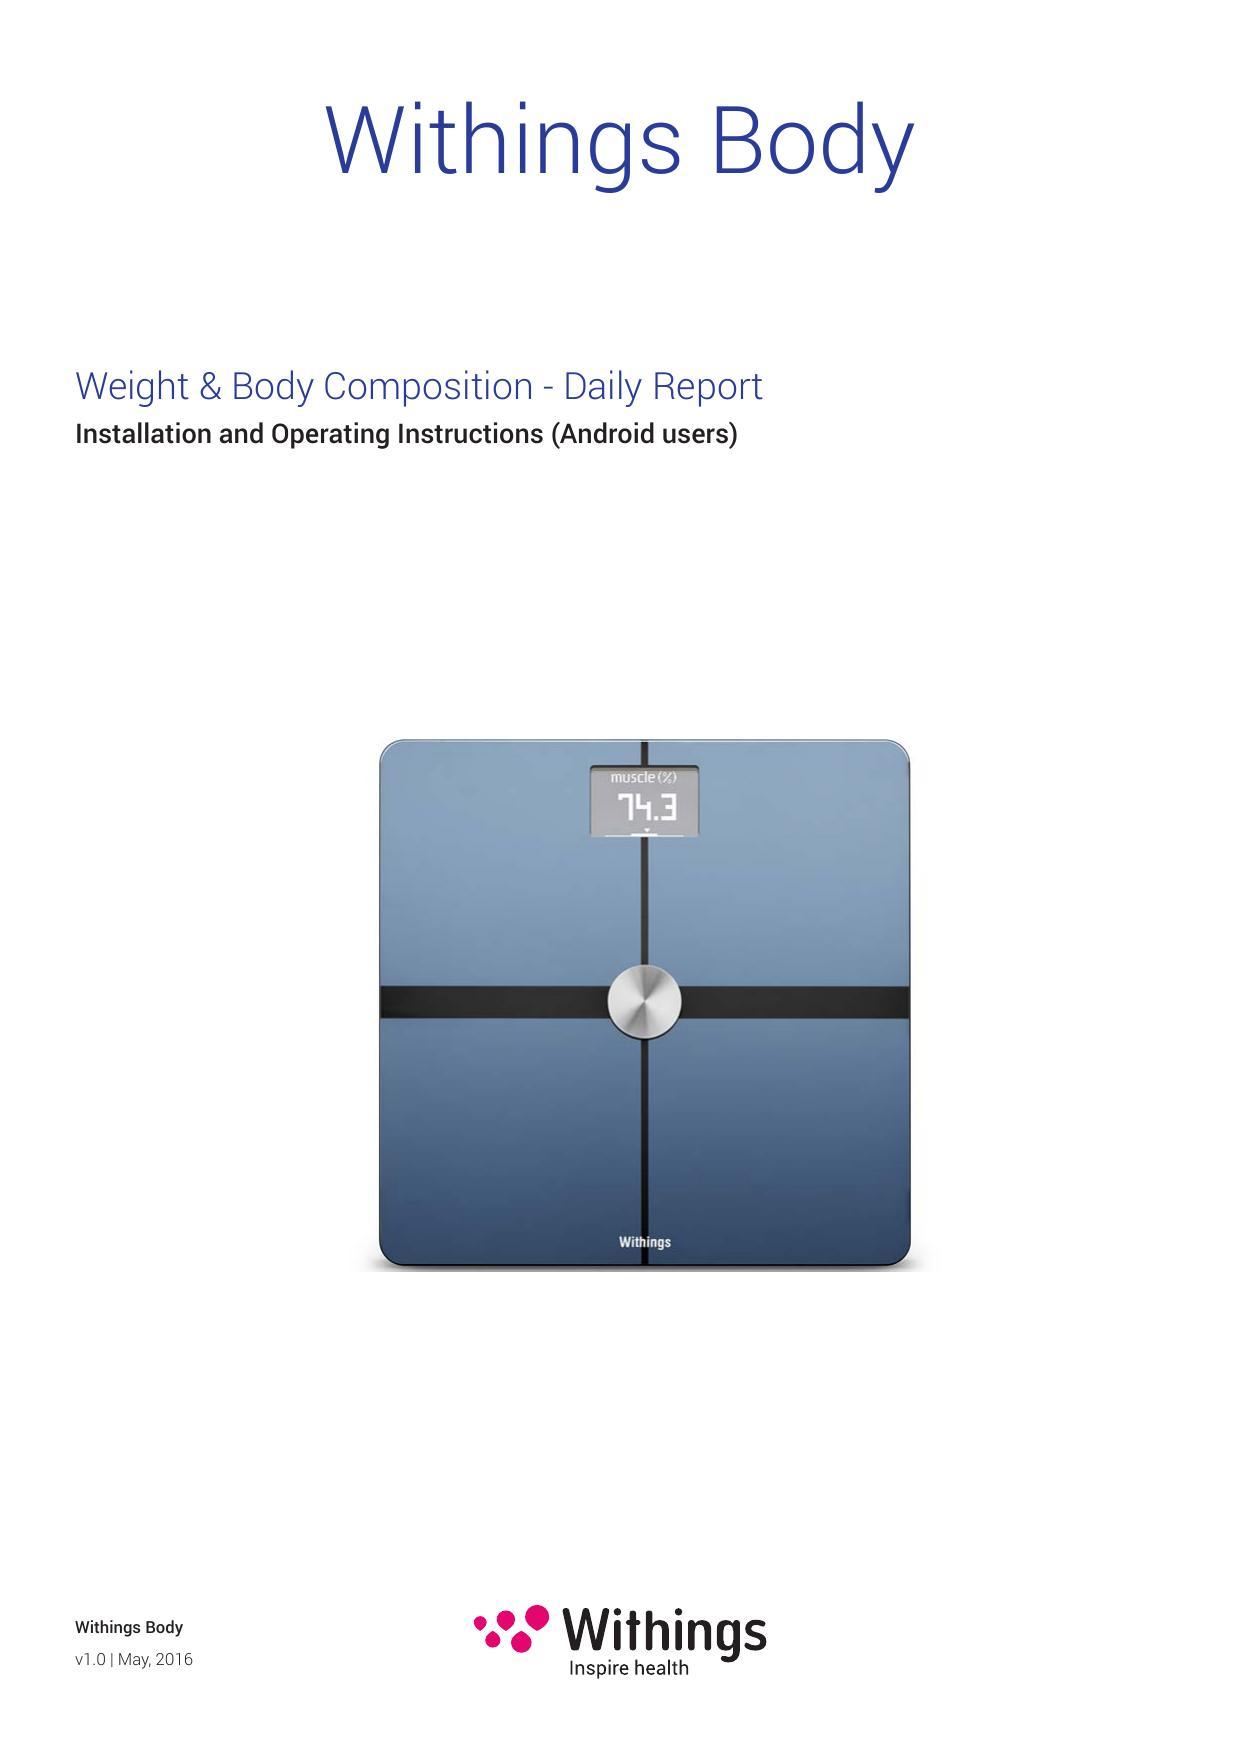 withings-body-vlo-weight-body-composition-daily-report-installation-and-operating-instructions-android-users.pdf